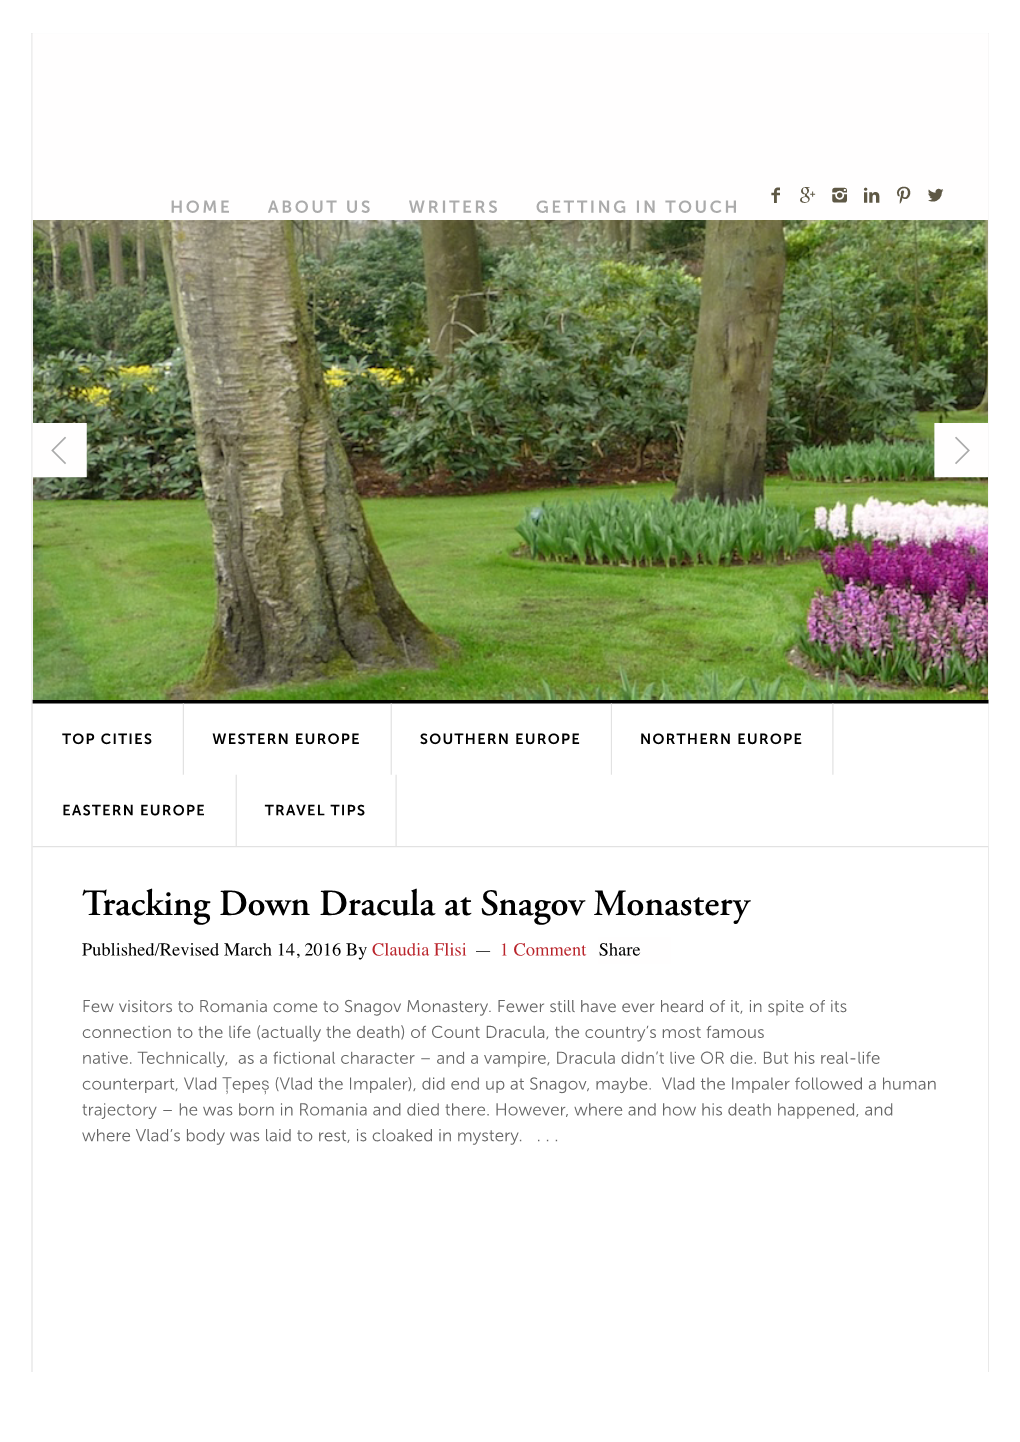 Tracking Down Dracula at Snagov Monastery Published/Revised March 14, 2016 by Claudia Flisi — 1 Comment Share